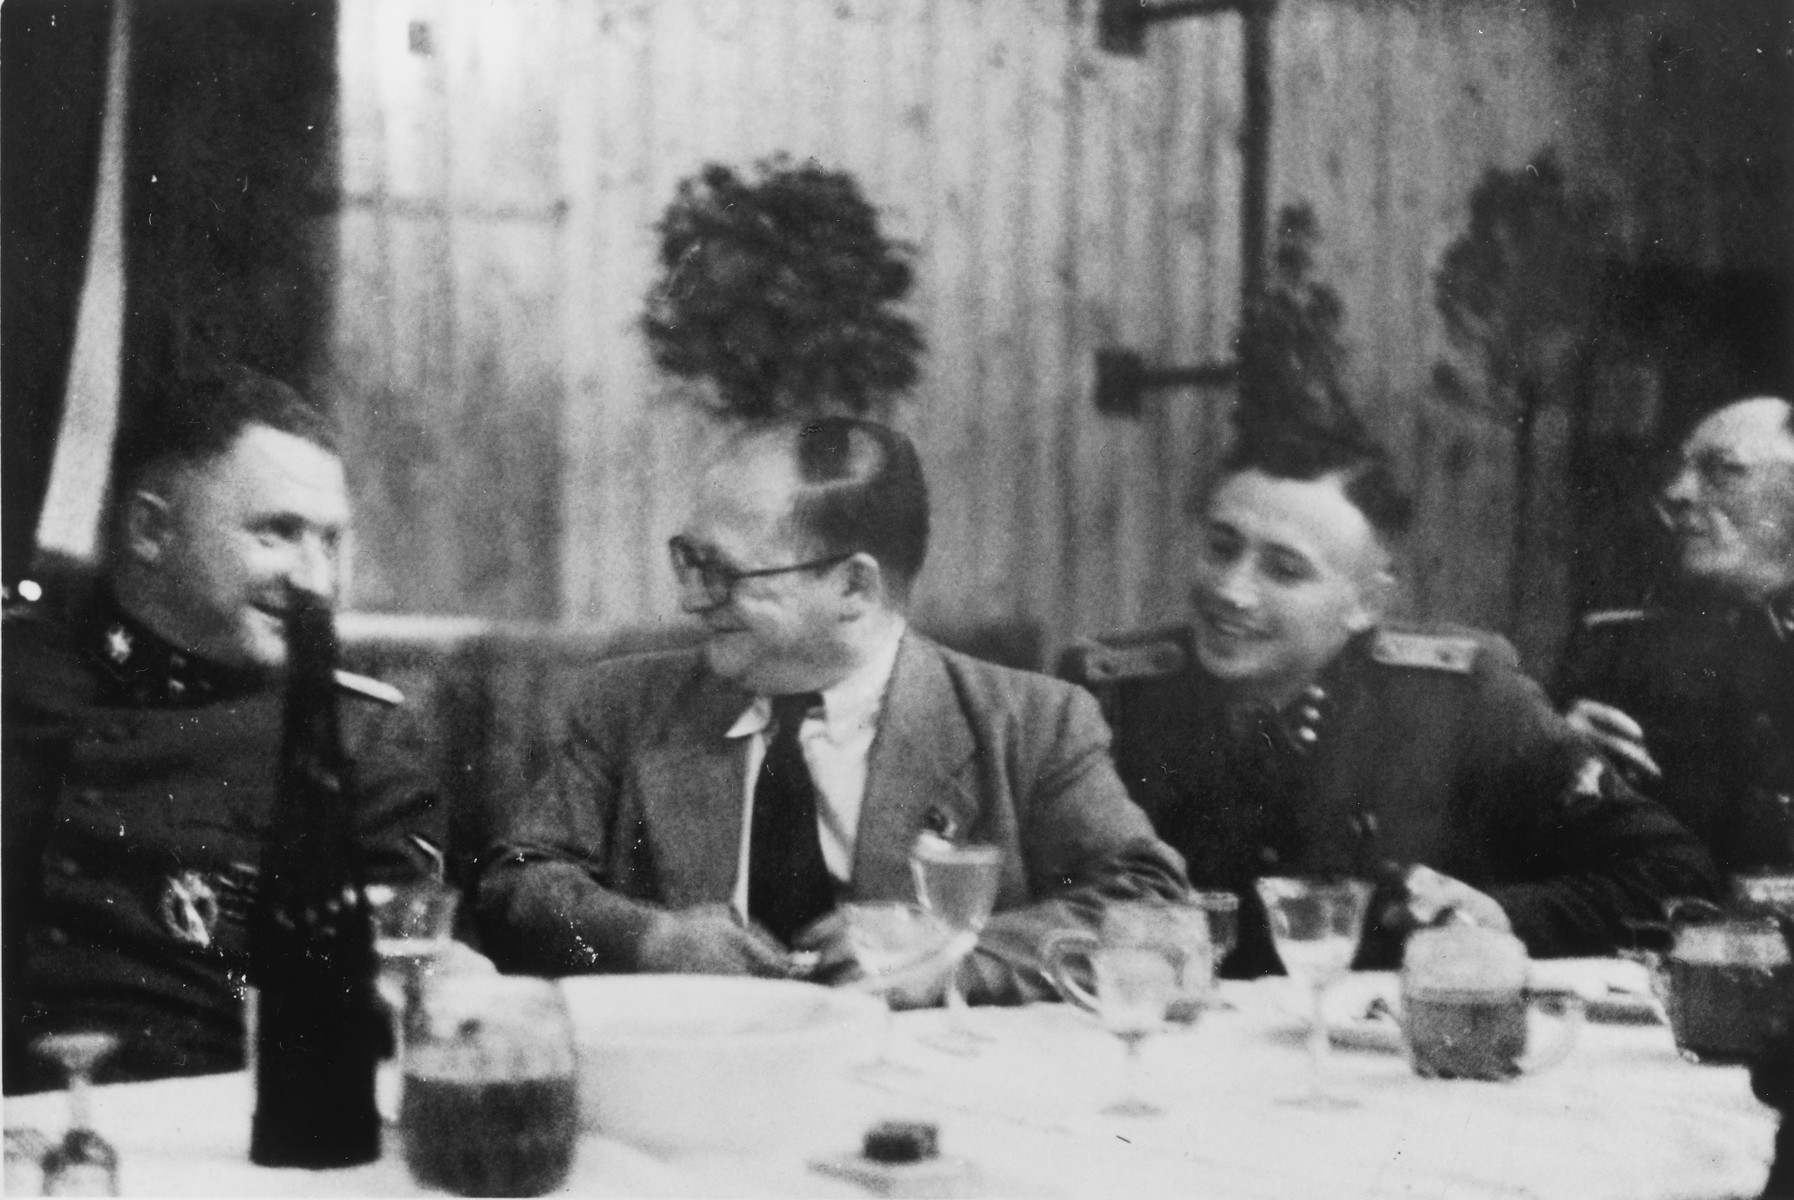 SS officers gather for drinks following the dedication of the new SS hospital in Auschwitz.

Pictured from left to right Richard Baer, Dr. Carl Clauberg, Karl Hoecker, and Heinrich Josten.